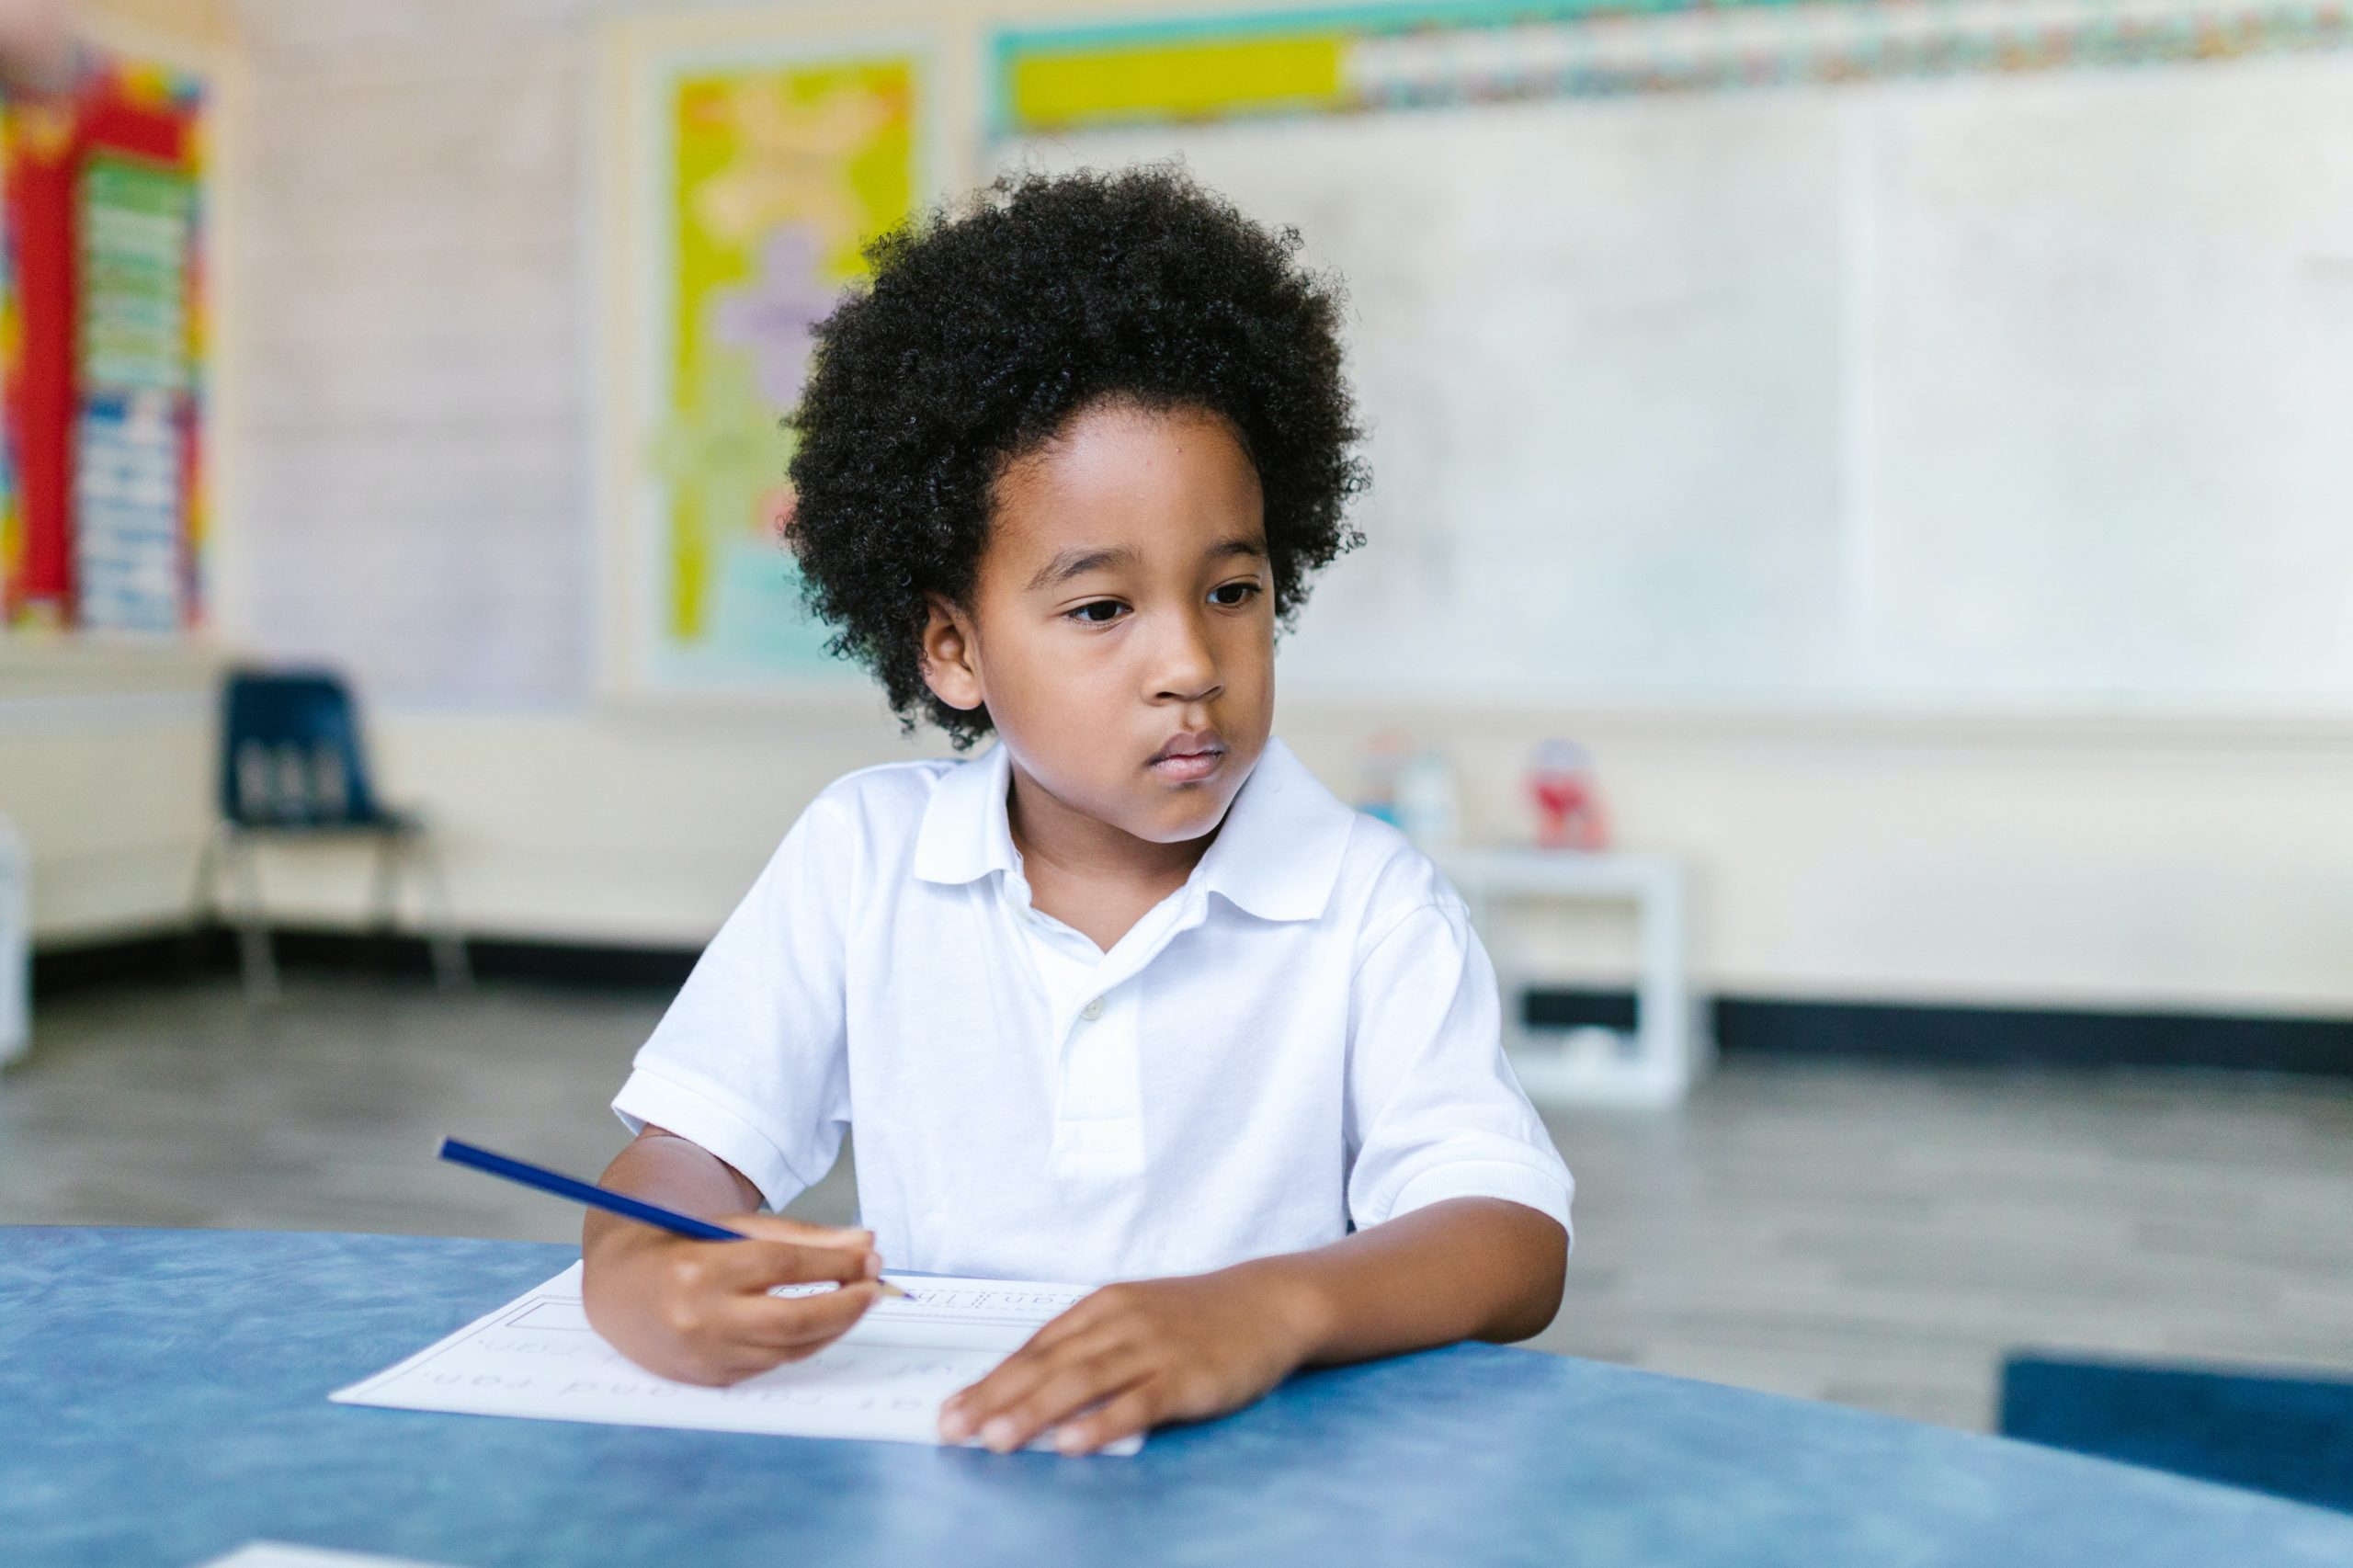 A schoolboy is holding a pen in one hand and looking in the opposite direction.